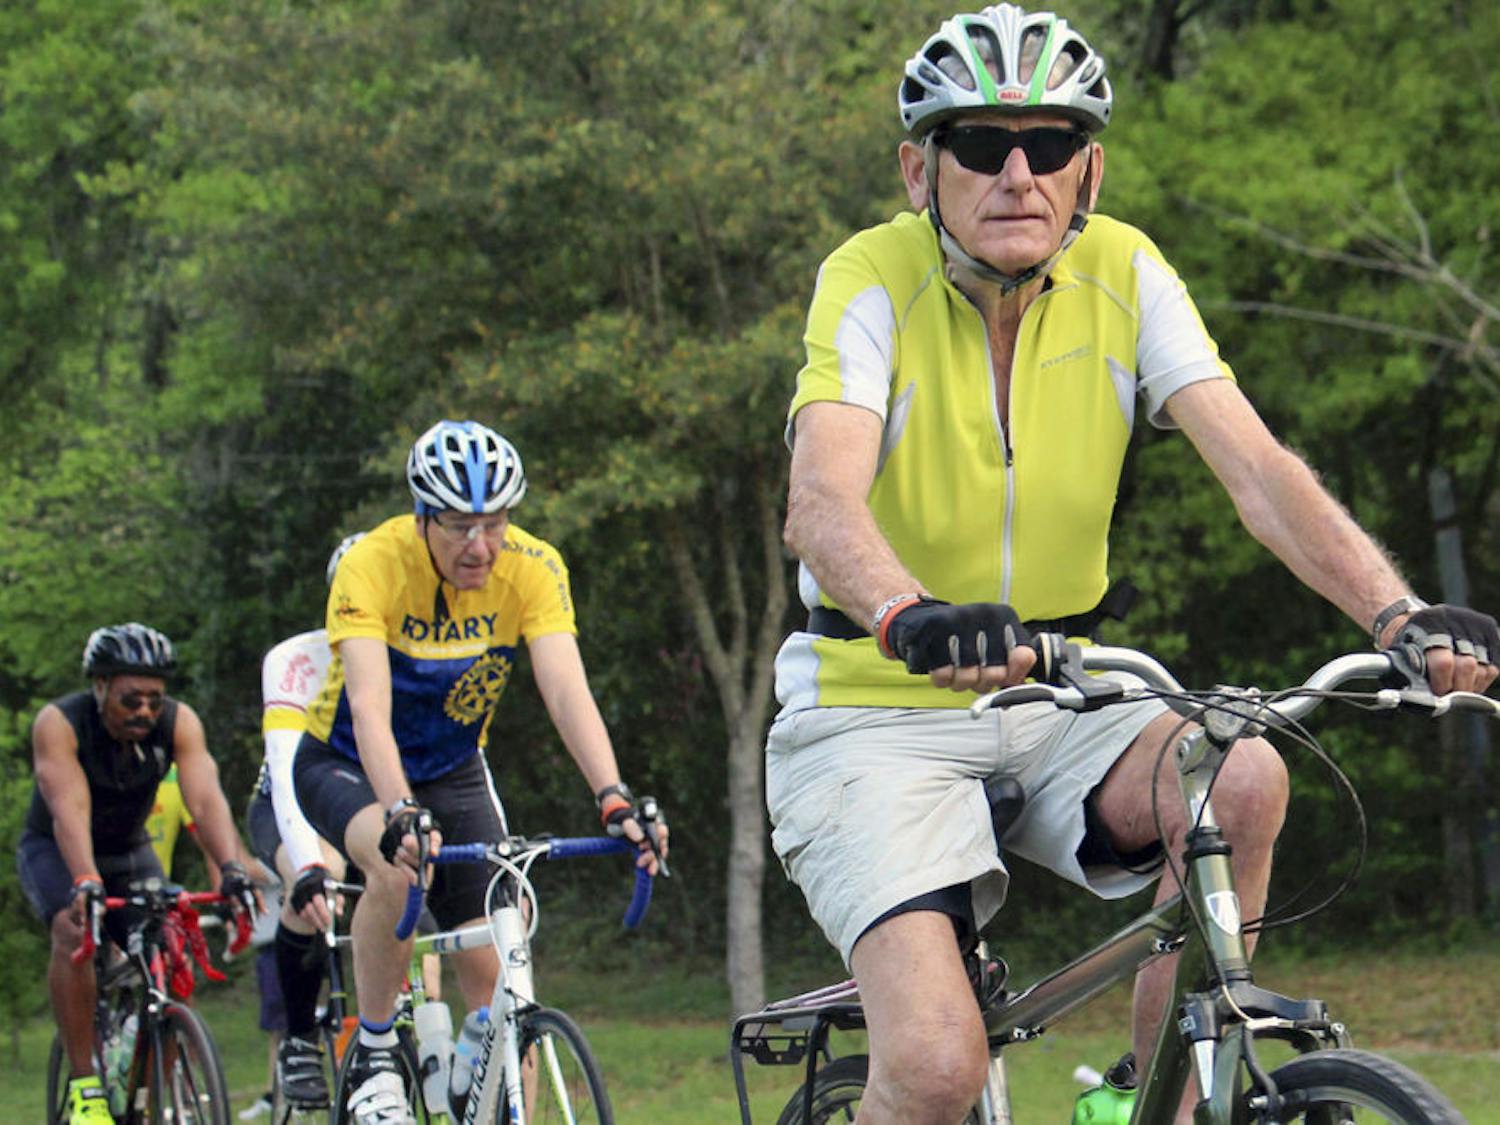 Albert van Soestbergen, an 82-year-old cyclist, participates in the 9th annual Ride to Remember on Saturday morning at Boulware Springs Park, an event that raises awareness for Alzheimer’s disease and sends all of its proceeds to Al’z Place, an adult day care for individuals with Alzheimer’s disease and other memory disorders. Soestbergen, originally from the Netherlands, said found an article about the event Friday and was eager to sign up. “Cycling is very important to me because where I come from there are more bicycles than people."